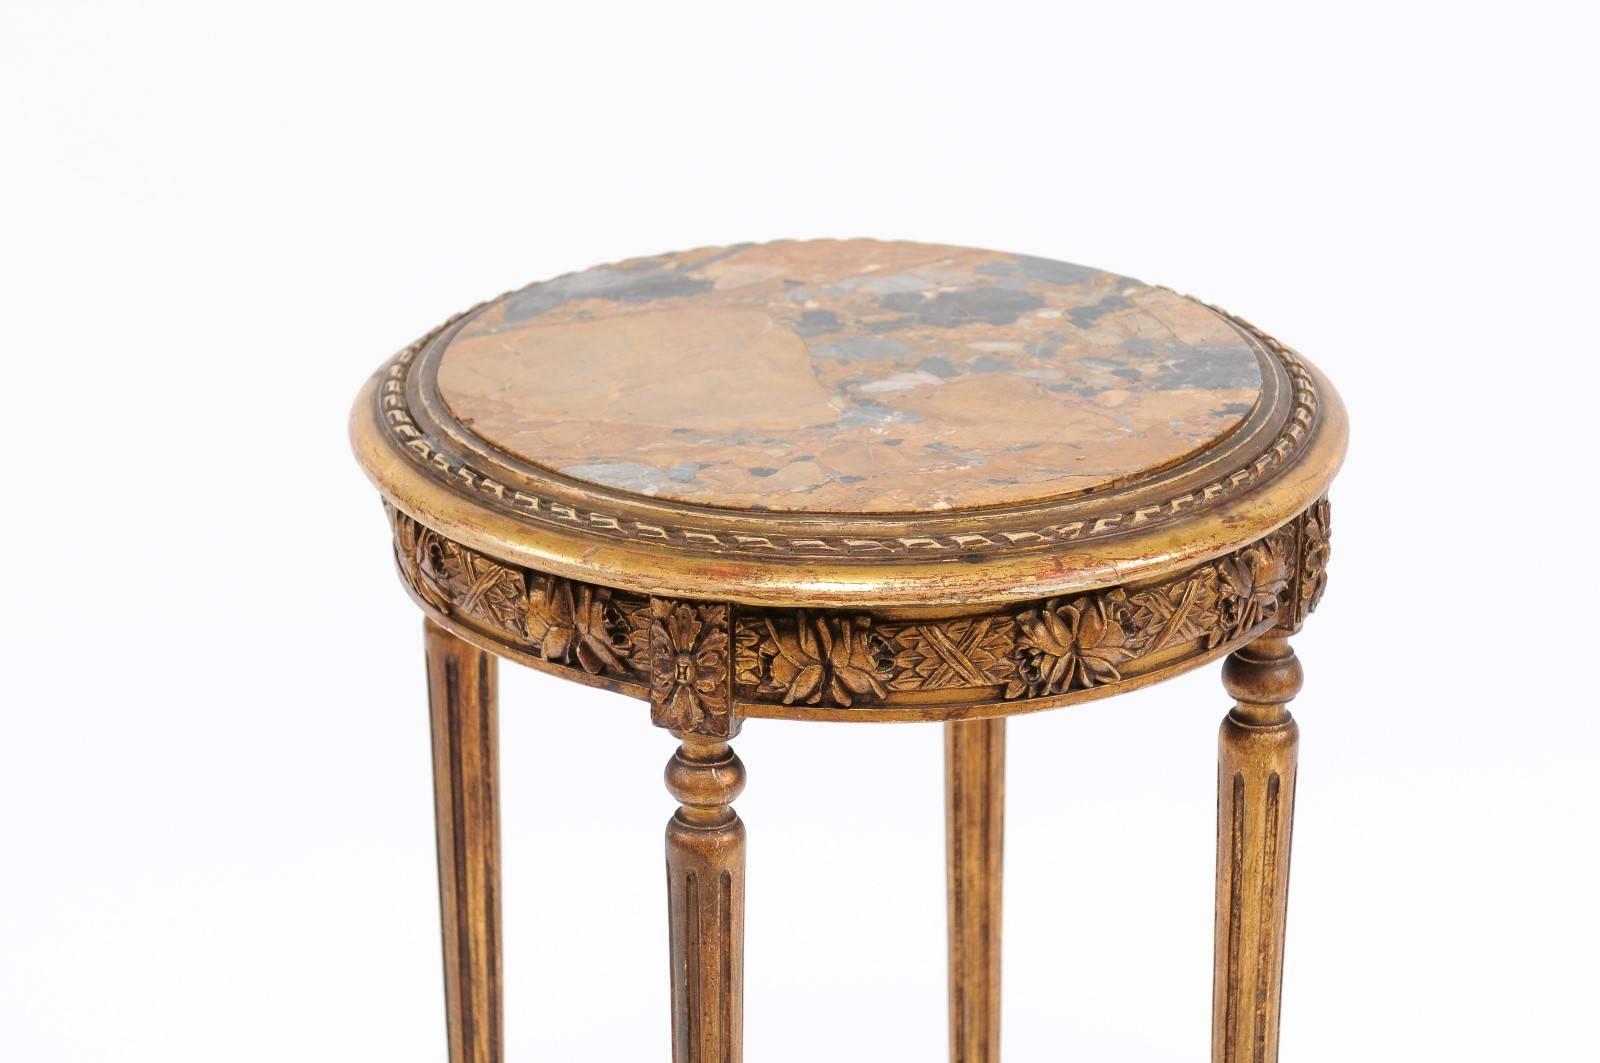 French 1930s Neoclassical Style Gilded Guéridon Table with Variegated Marble Top 4